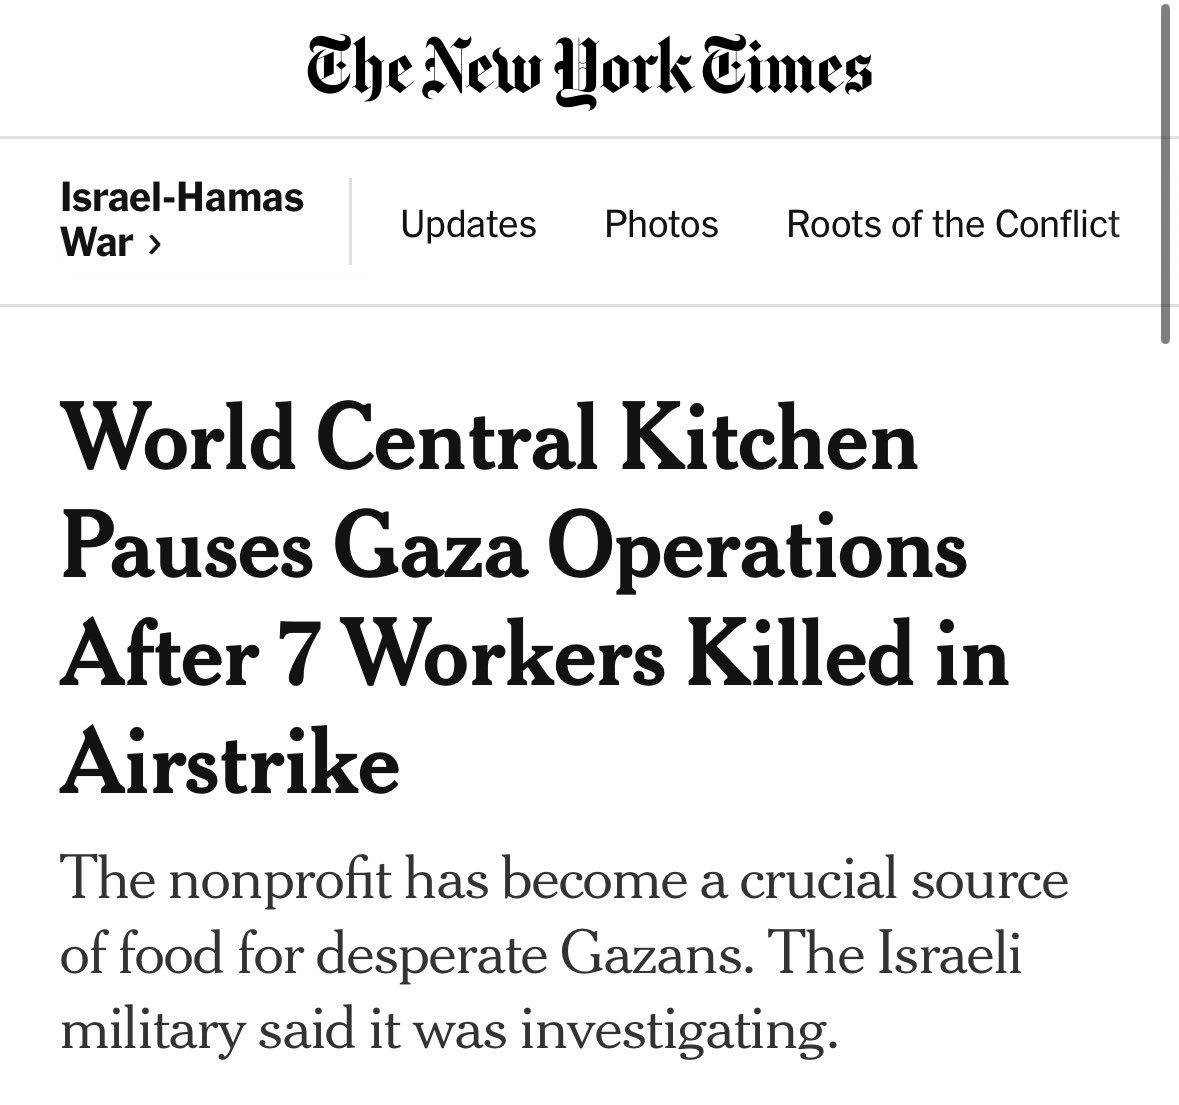 And this is why @WCKitchen workers were targeted -to this end: to stop the administration of food. To deter any humanitarian workers & orgs. Haven’t heard of any soup kitchens being targeted, but the Israelis are bent on starving Palestinians - so not a matter of if, but when.